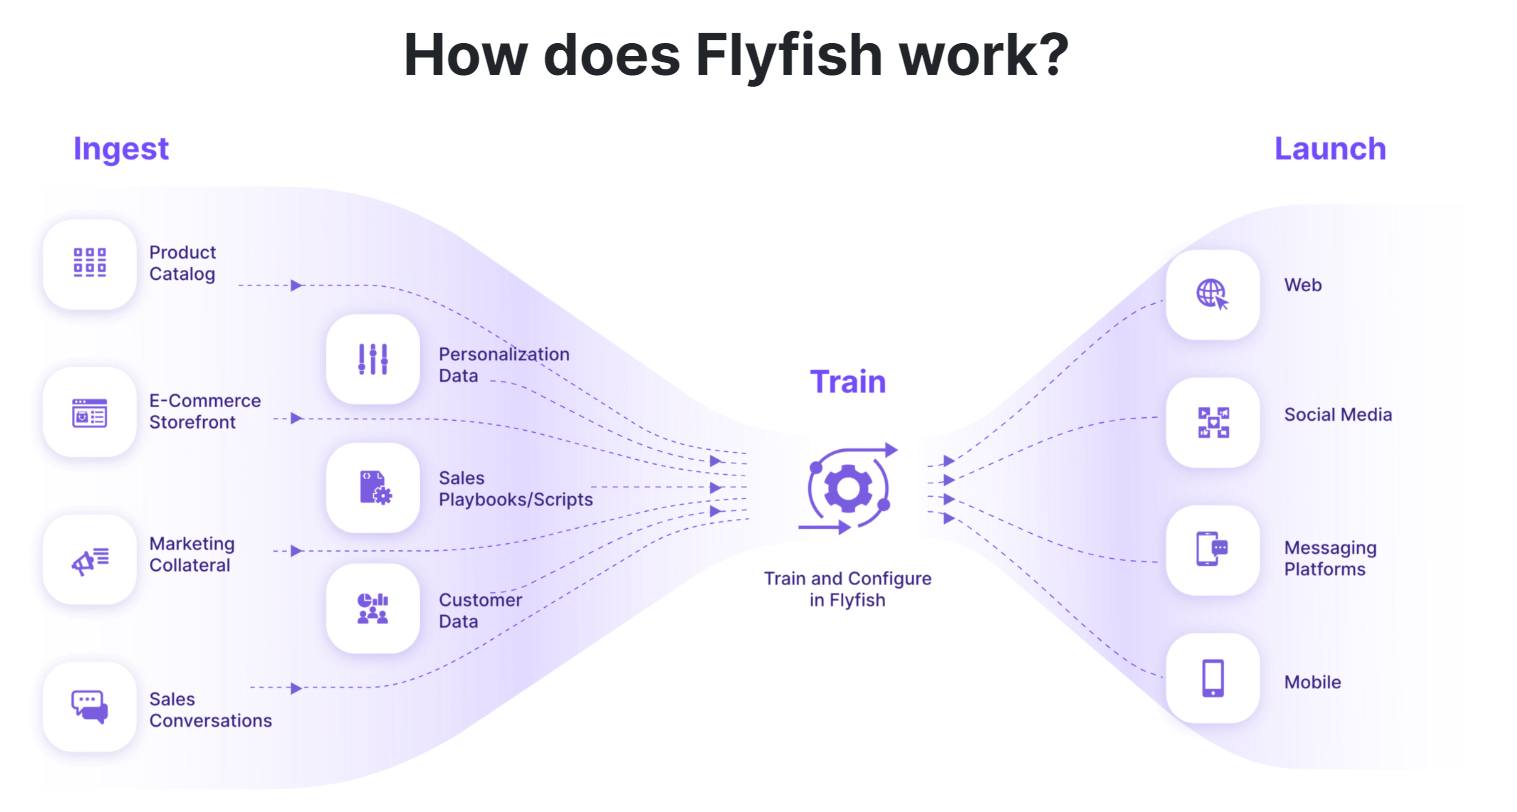 An image illustrating the working process of Flyfish.